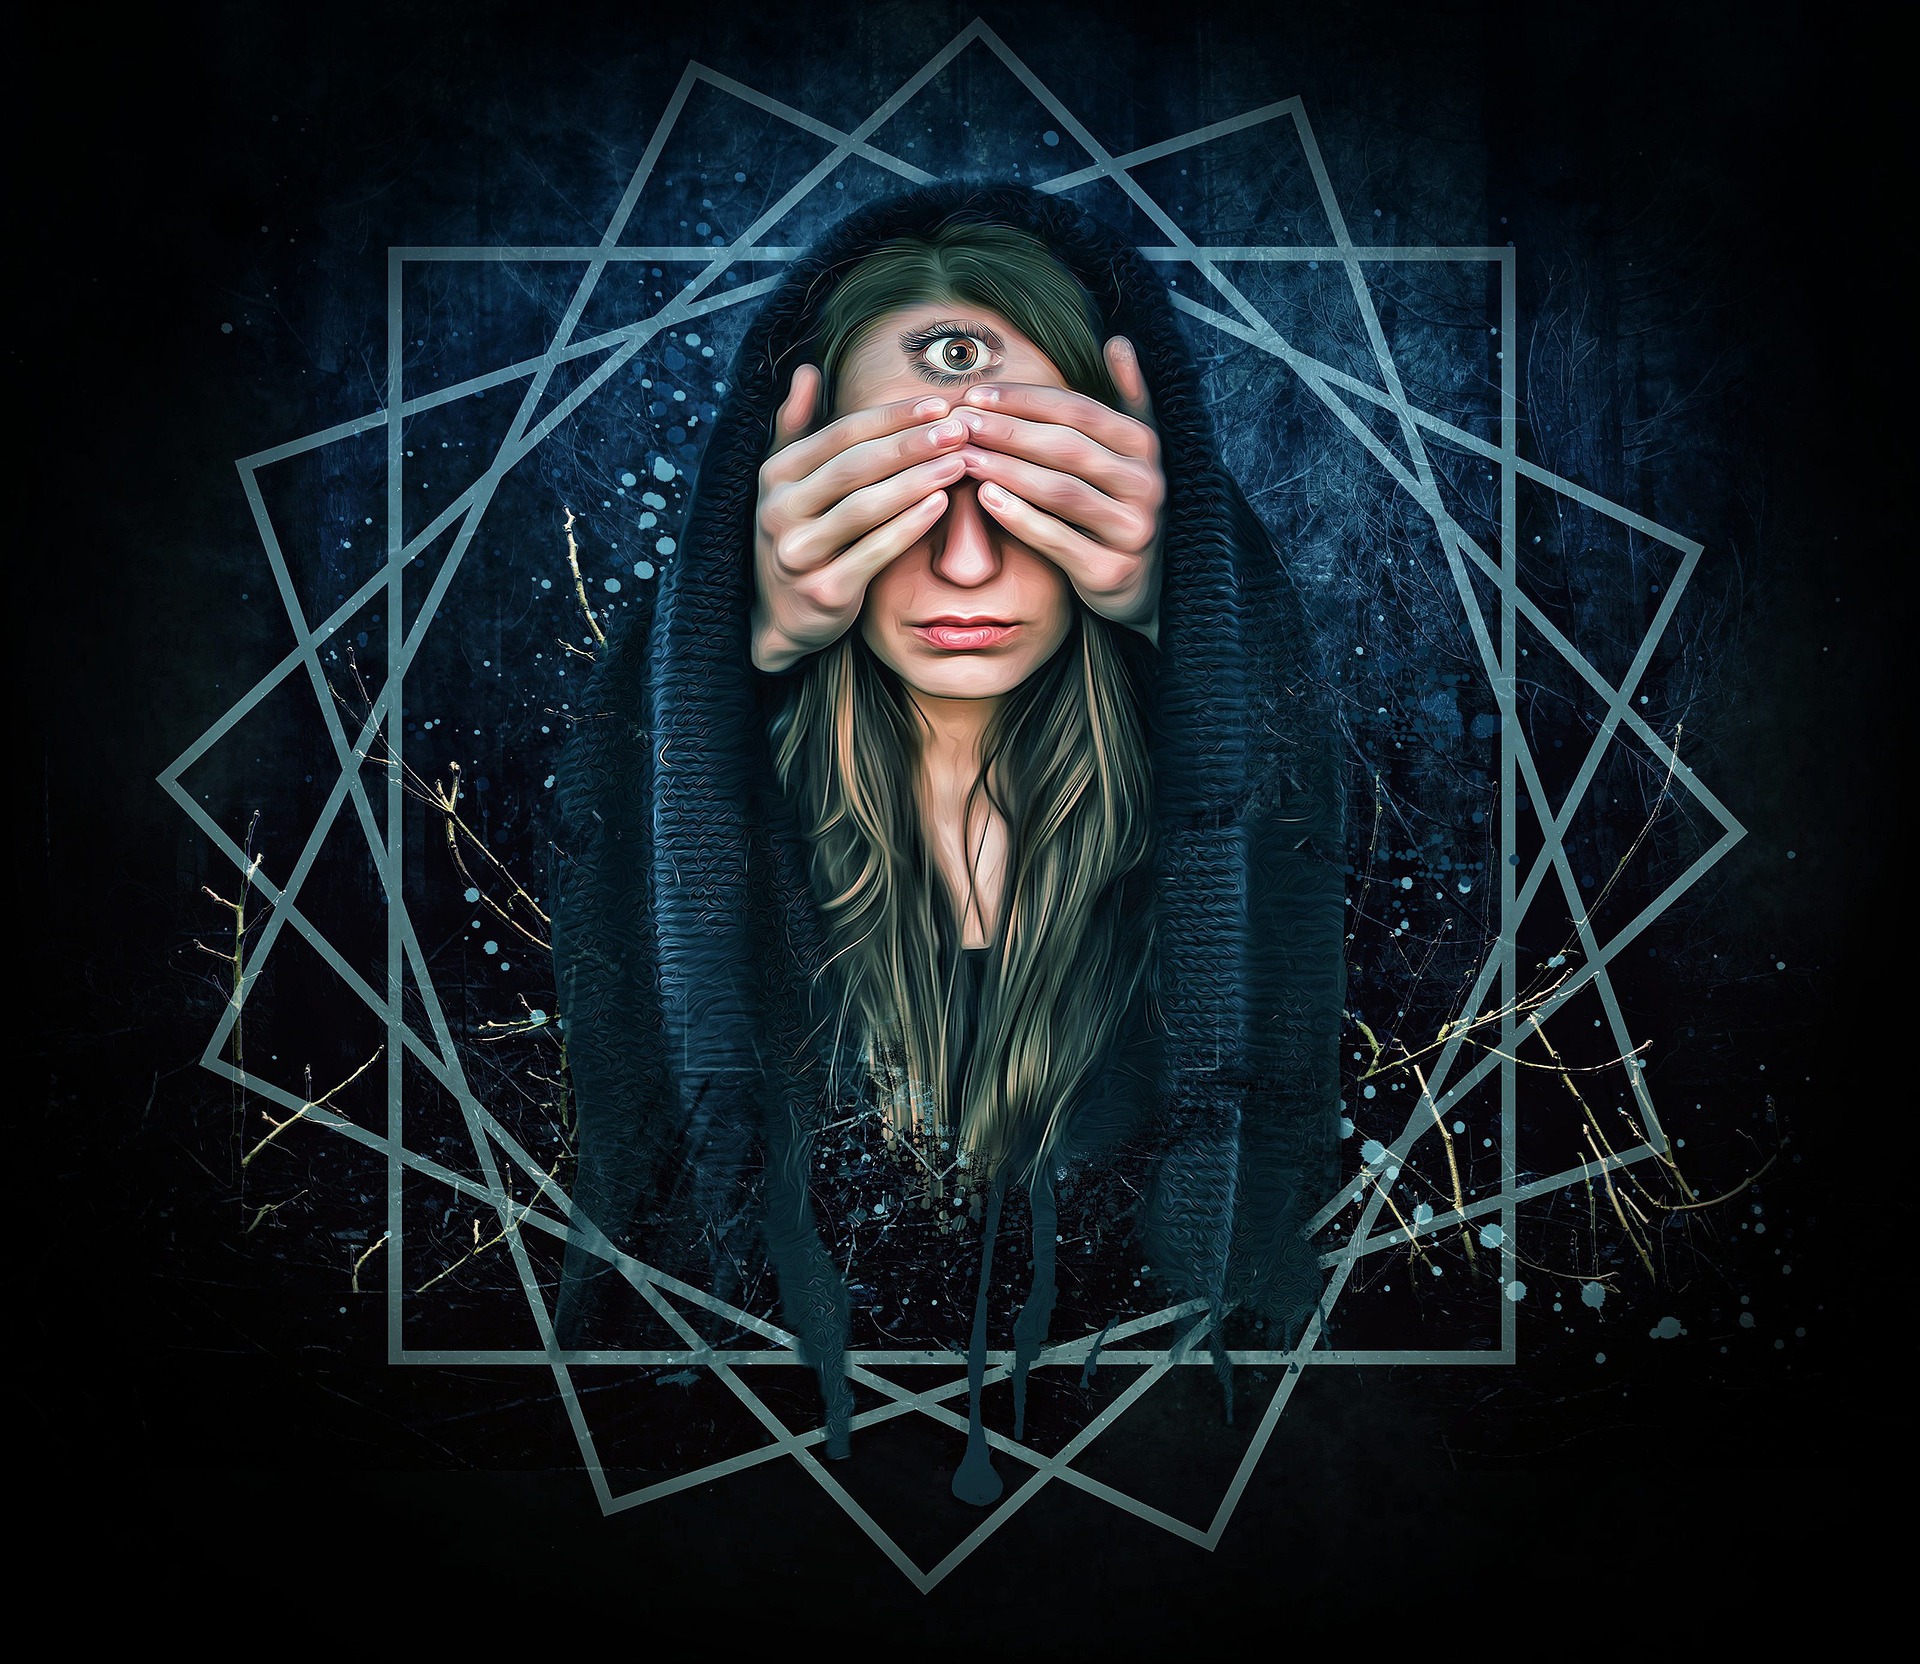 The Best Psychic Templates For Your New Site - Make A Business With Your Fortune Telling Skill